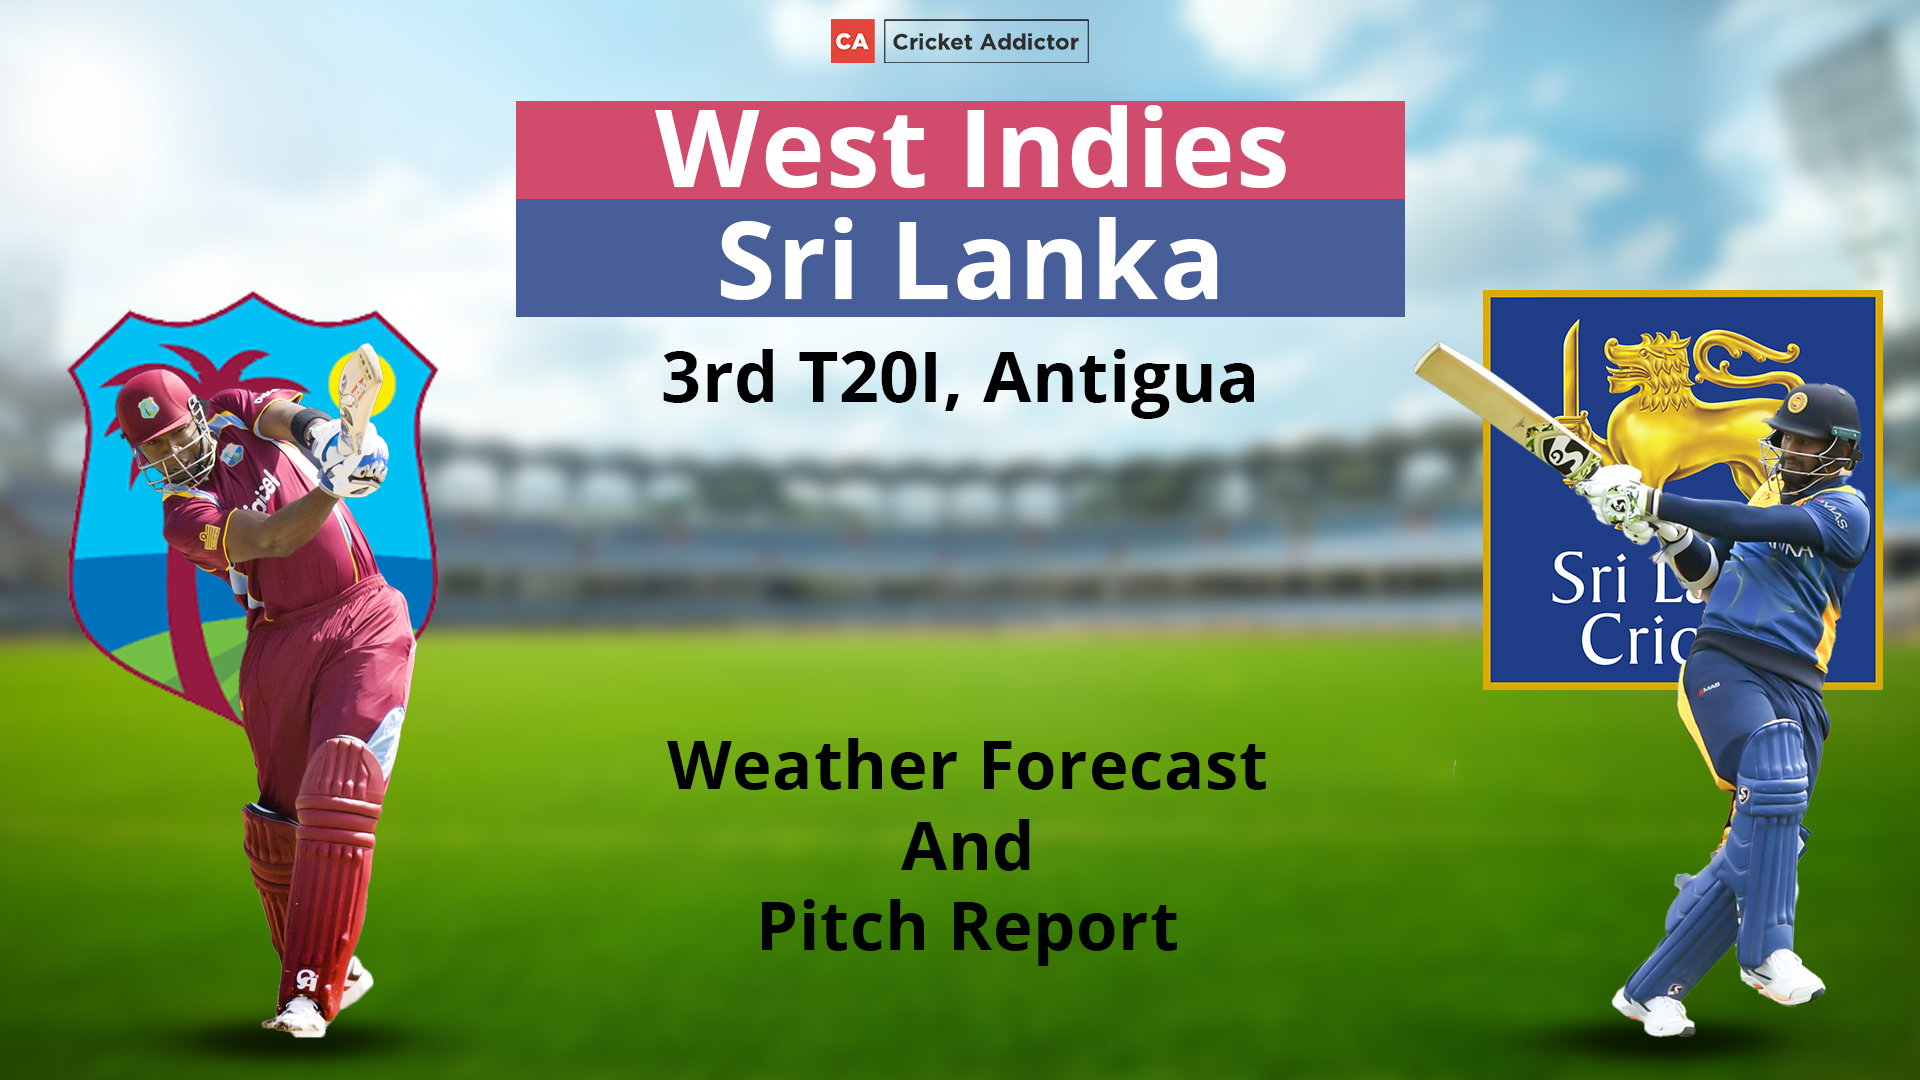 West Indies vs Sri Lanka 2021, 3rd T20I: Weather Forecast And Pitch Report